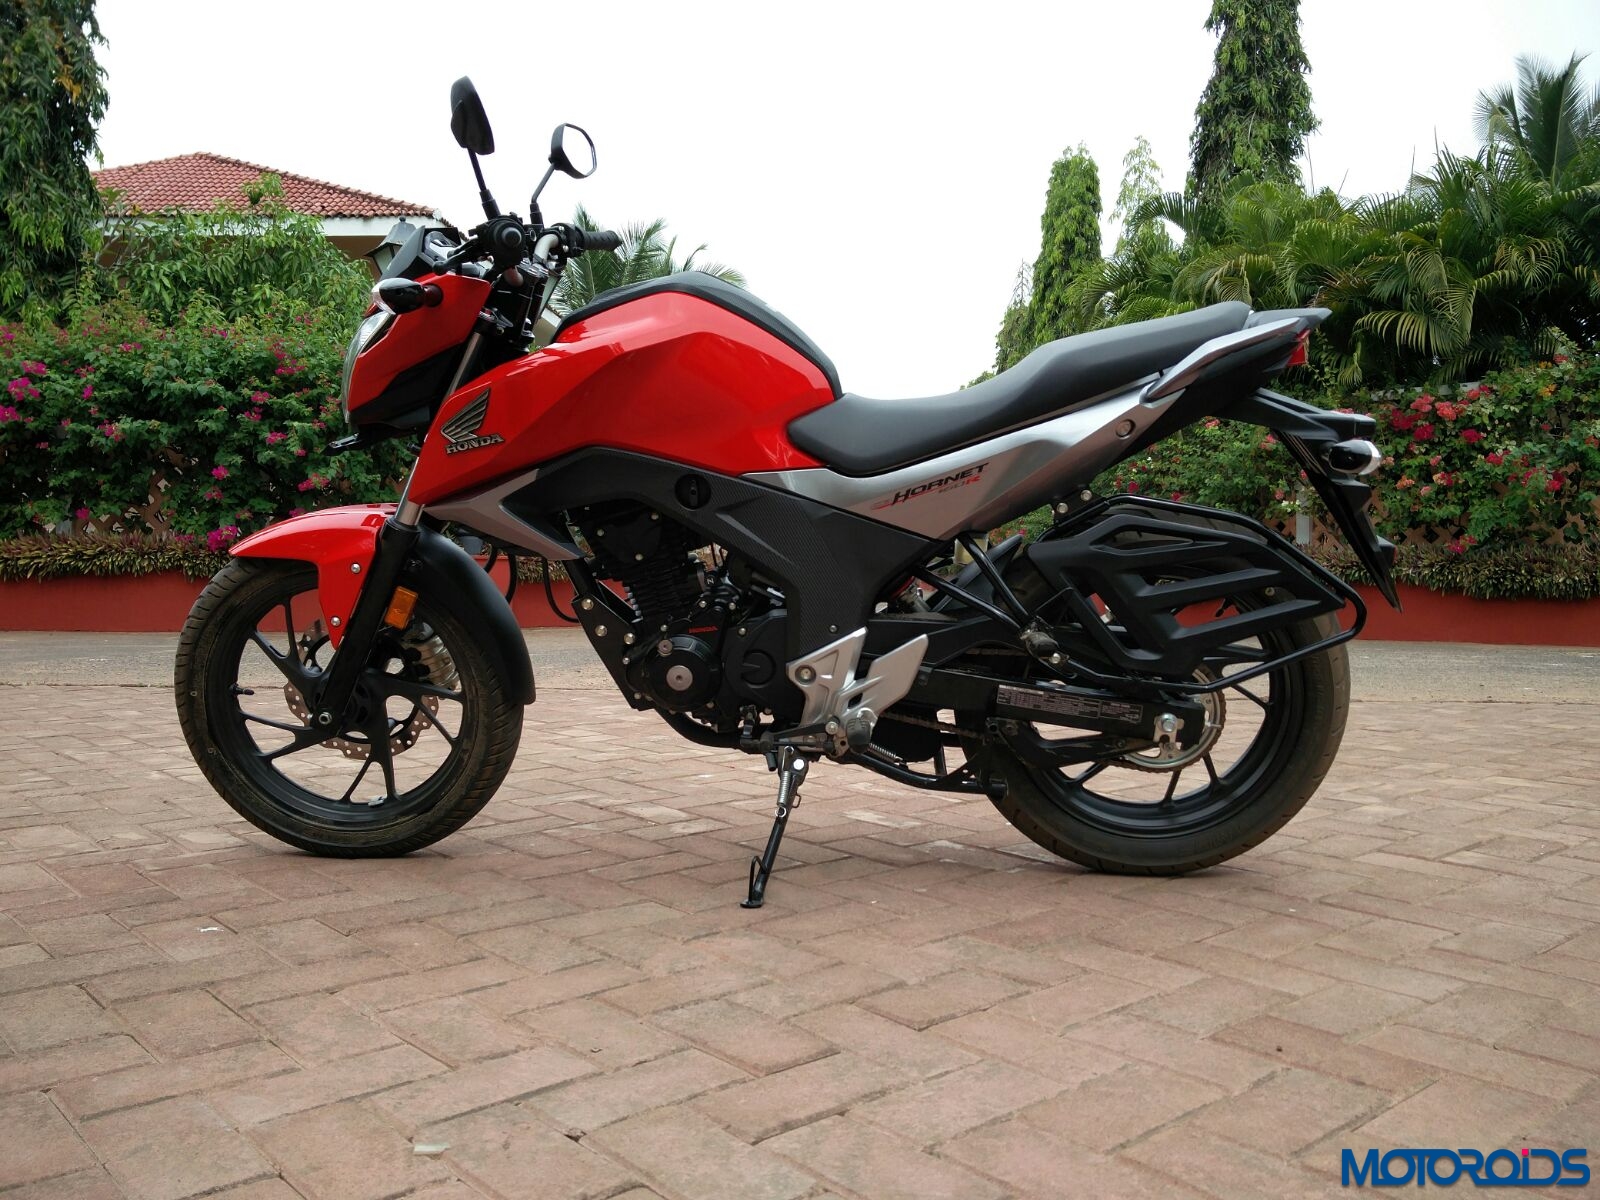 Honda Cb Hornet 160r First Ride Review Images Specs And Details Dressy Diligence Motoroids